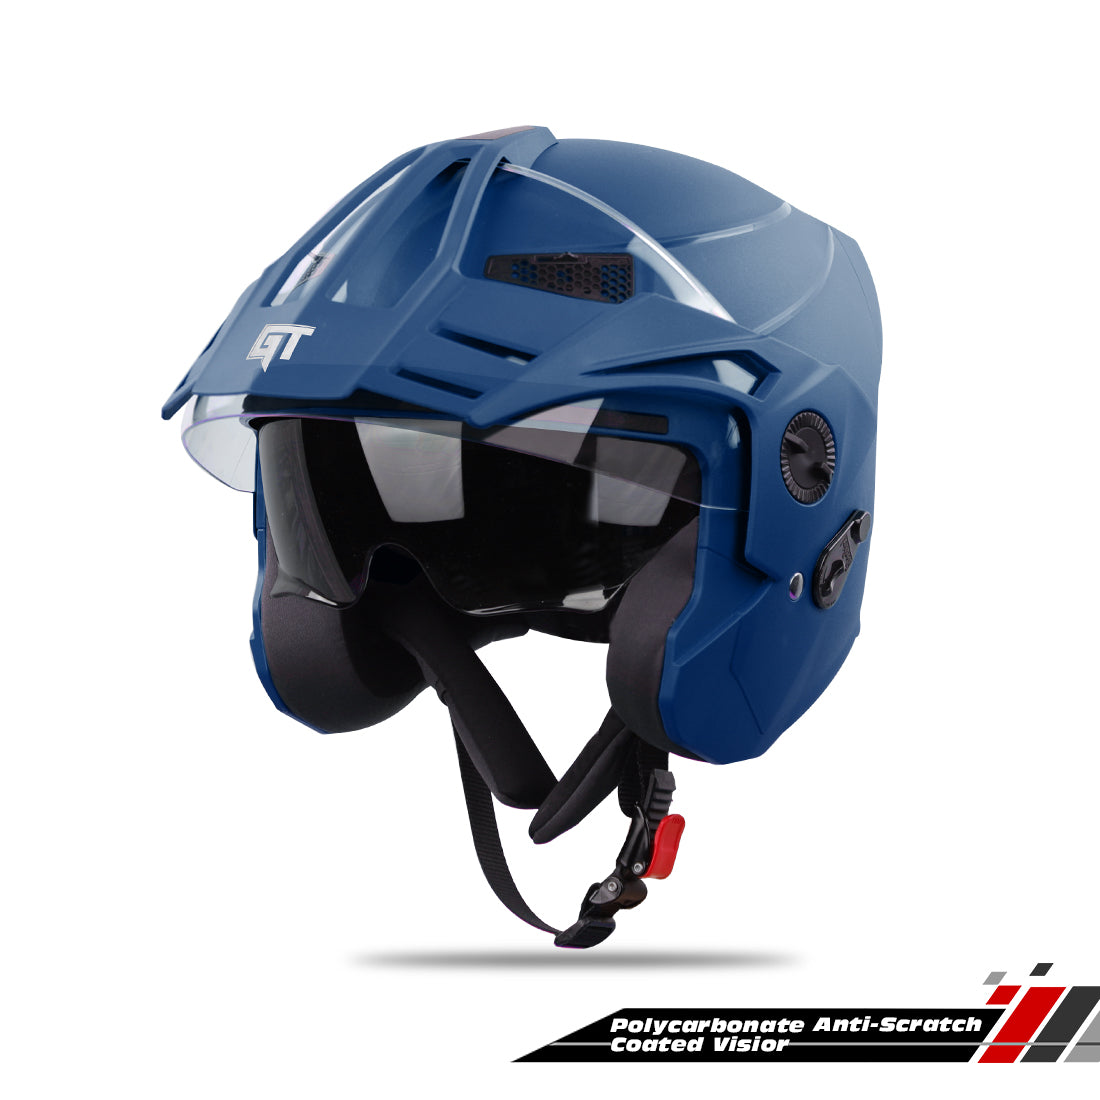 Steelbird SBH-23 GT Plus Open Face ISI Certified Helmet for Men and Women with Inner Sun Shield (Dashing Blue)